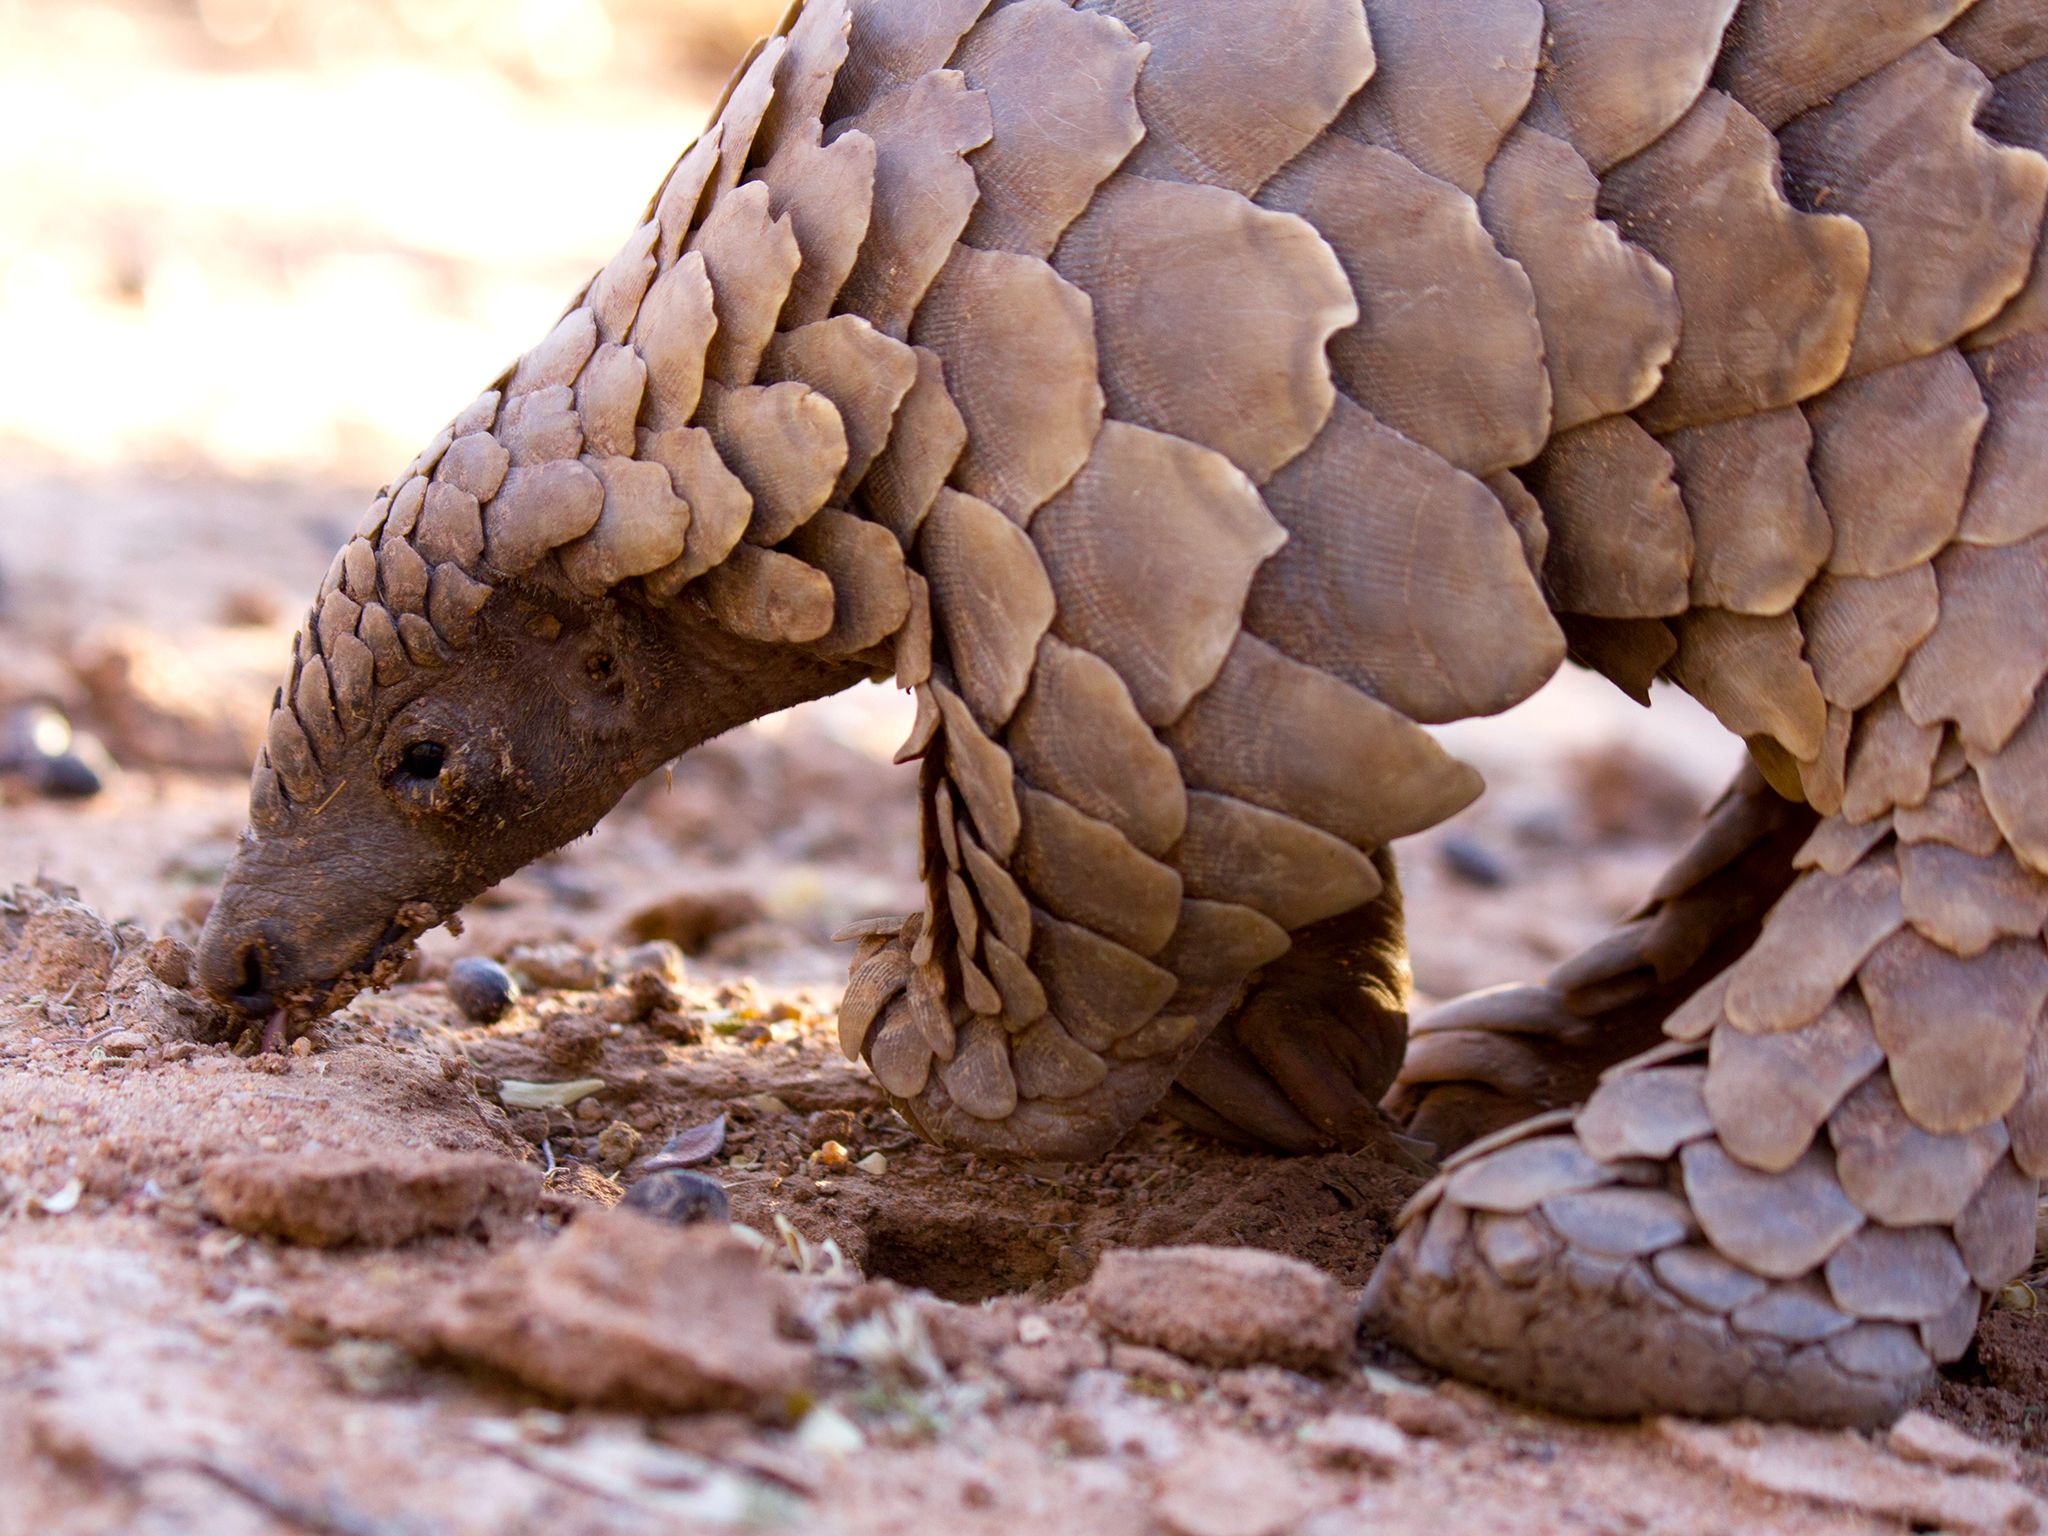 Otjiwarongo, South Africa: A ground pangolin licking up termites recently discovered. The... [Photo of the day - June 2016]